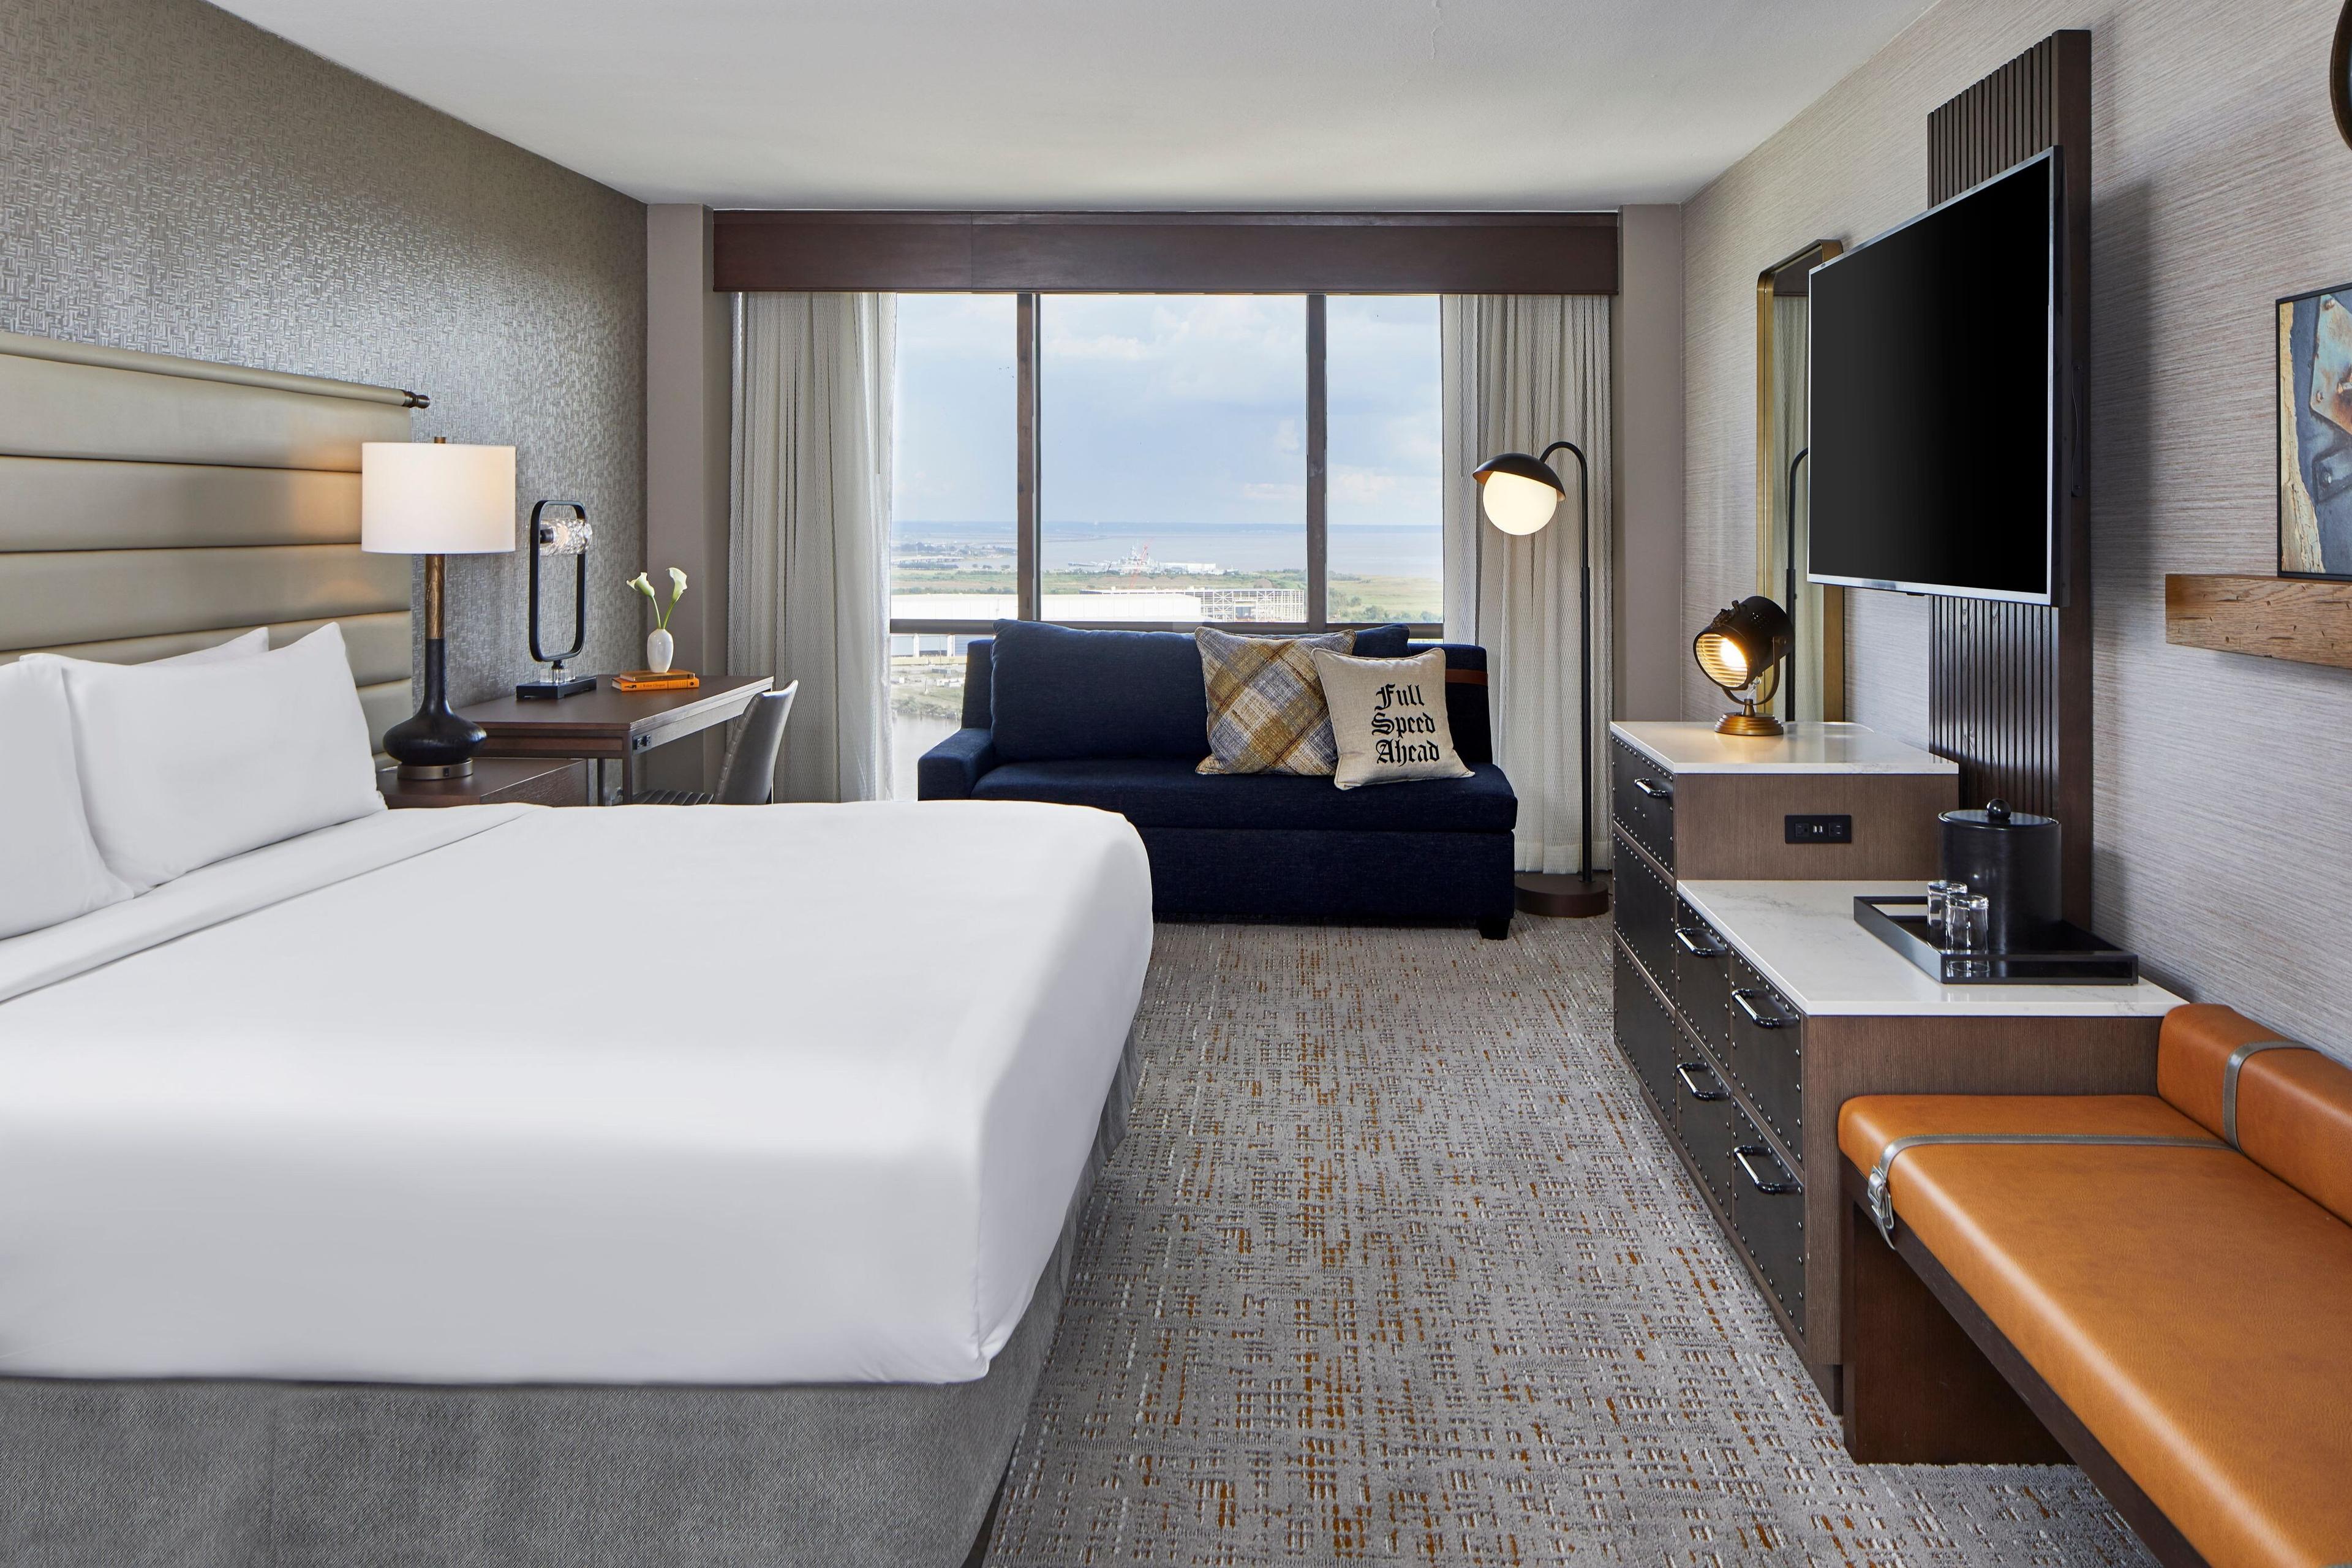 From the plush bedding to the views of the Mobile River, our king river view rooms are designed to pamper you during your stay.